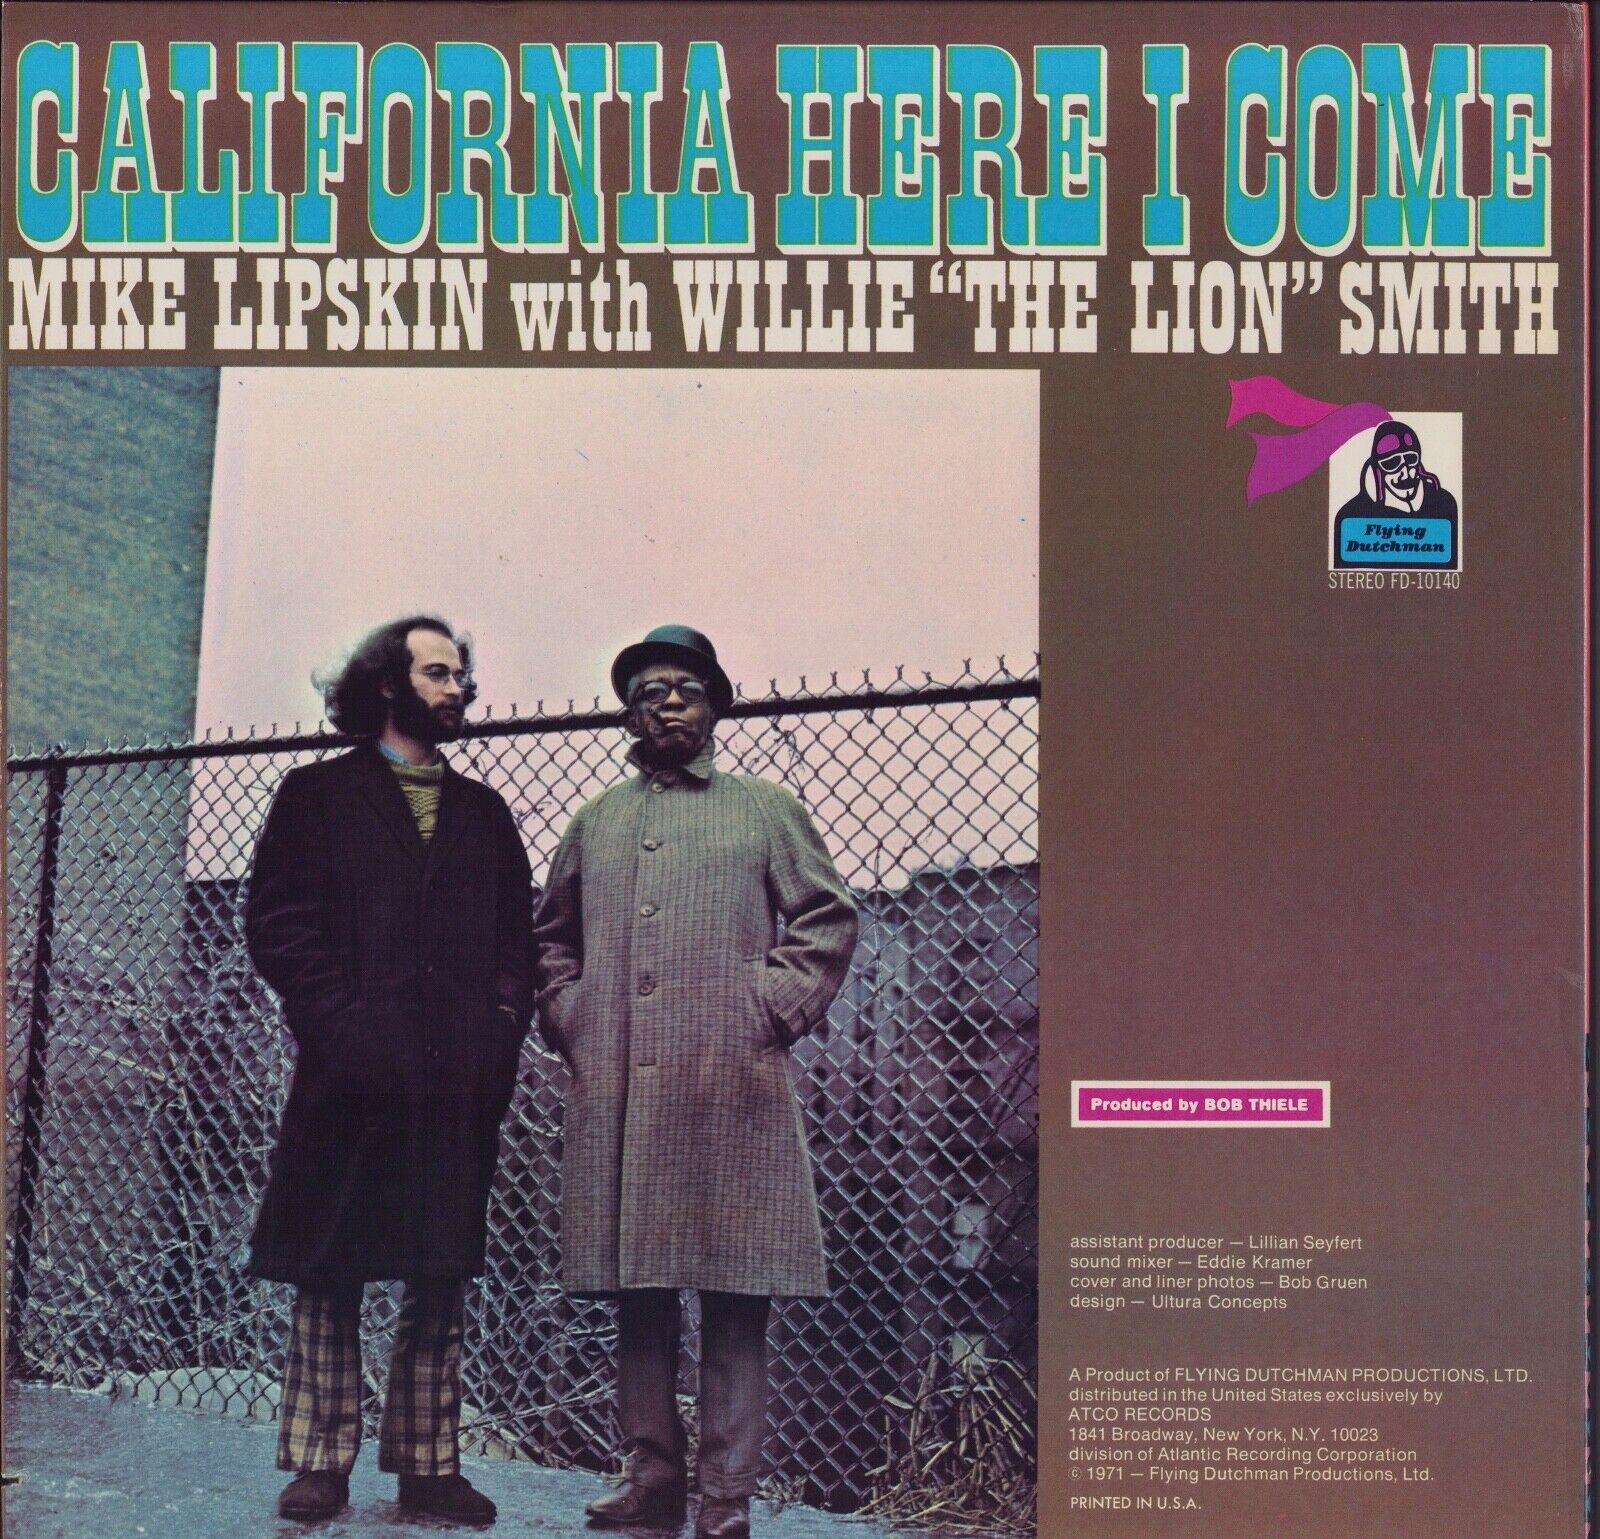 Mike Lipskin With Willie "The Lion" Smith ‎- California Here I Come Vinyl LP US